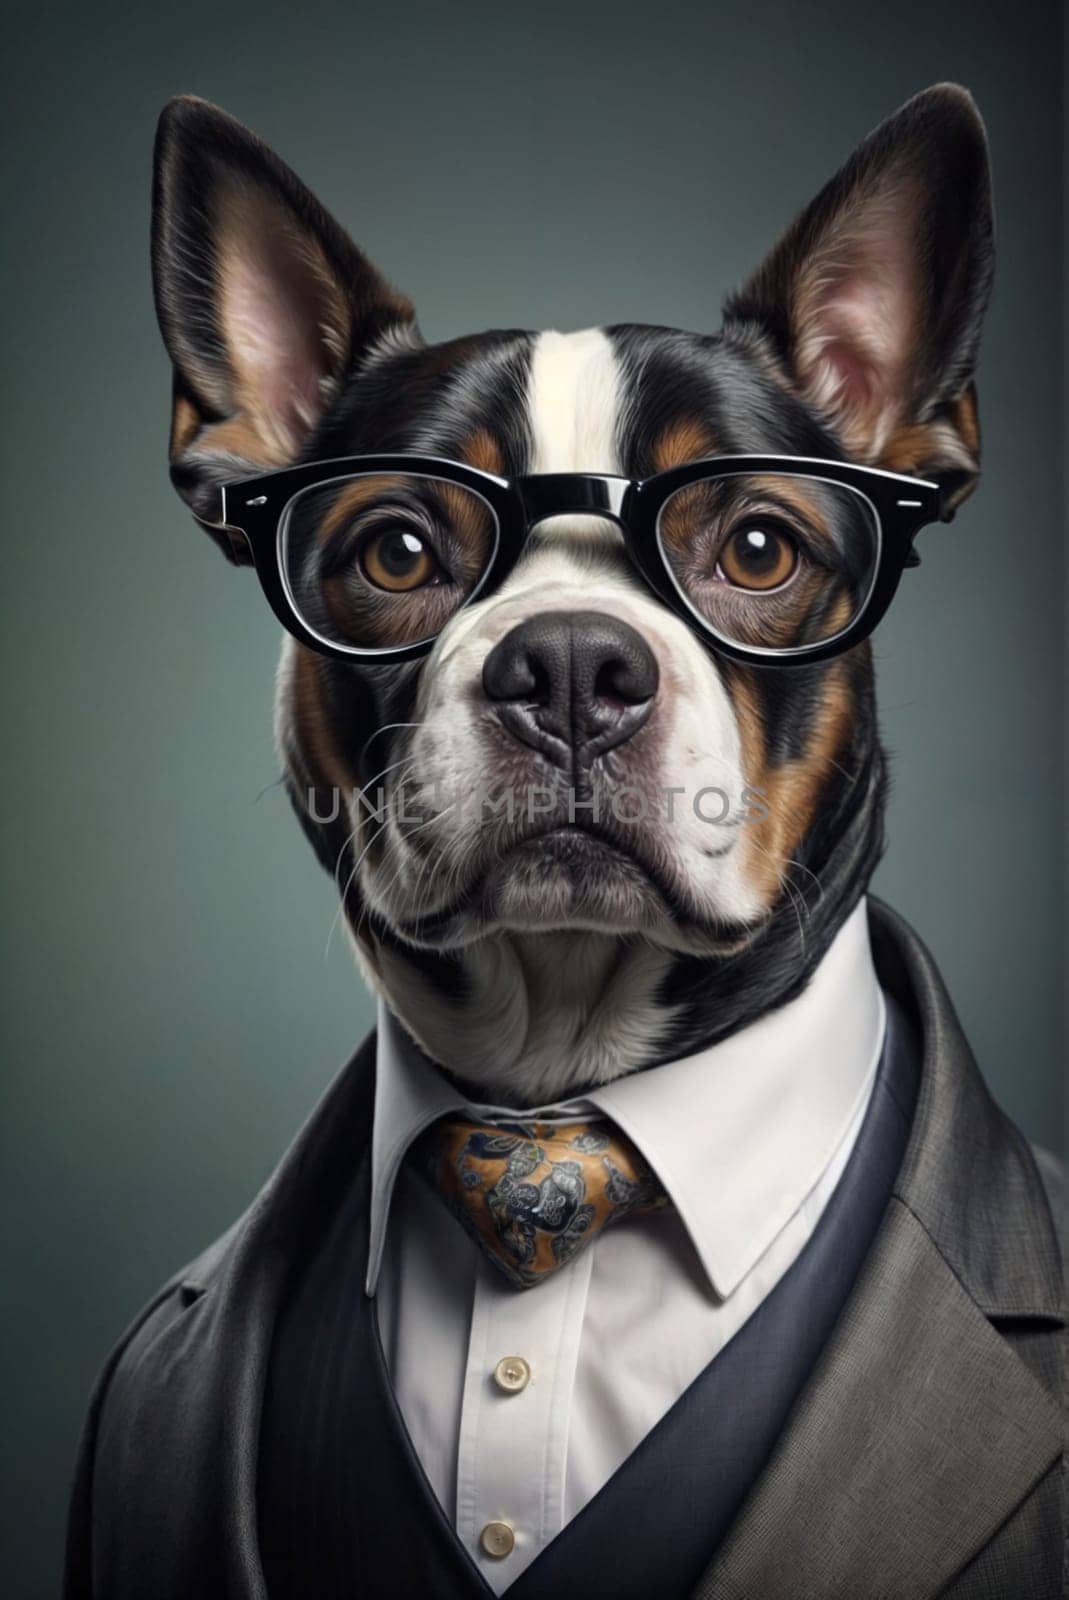 Anthropomorphic dog is dressed in a formal suit and wearing glasses, standing upright. The dog exudes professionalism and style in this unique and amusing attire. AI generated